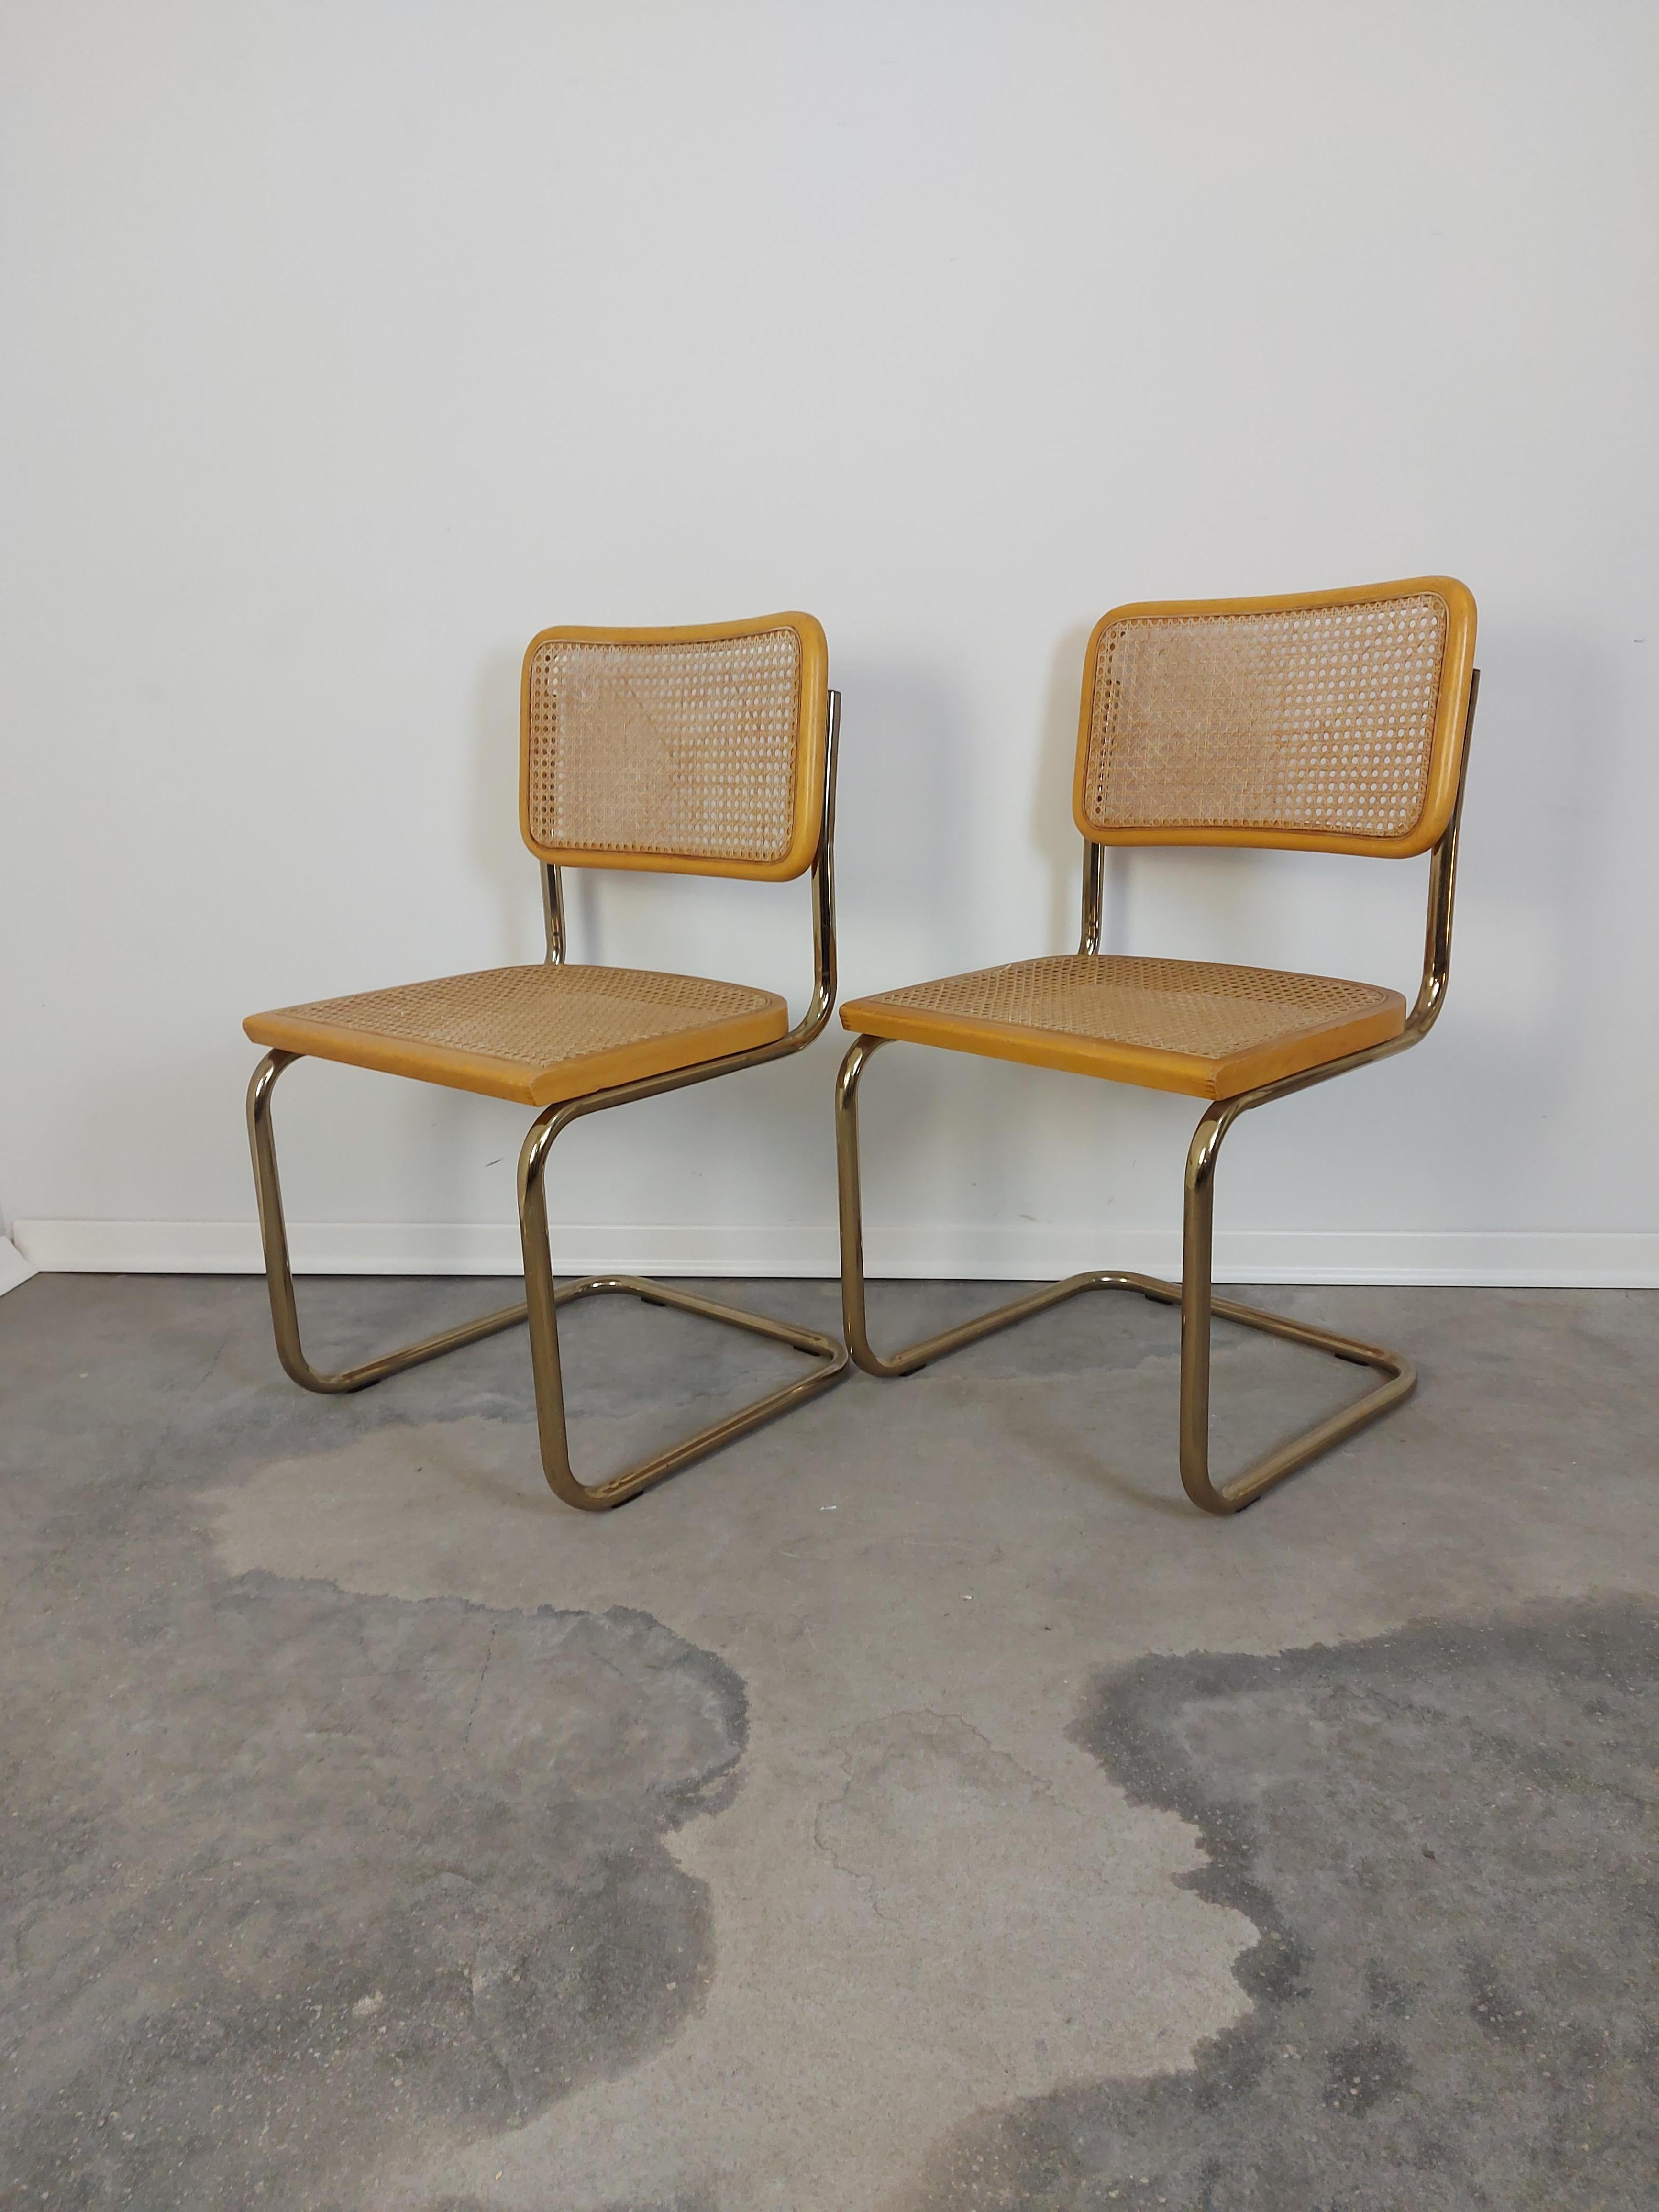 Slovenian CESCA Chair, 1980s, Pair Design Classic with Gilded Frame